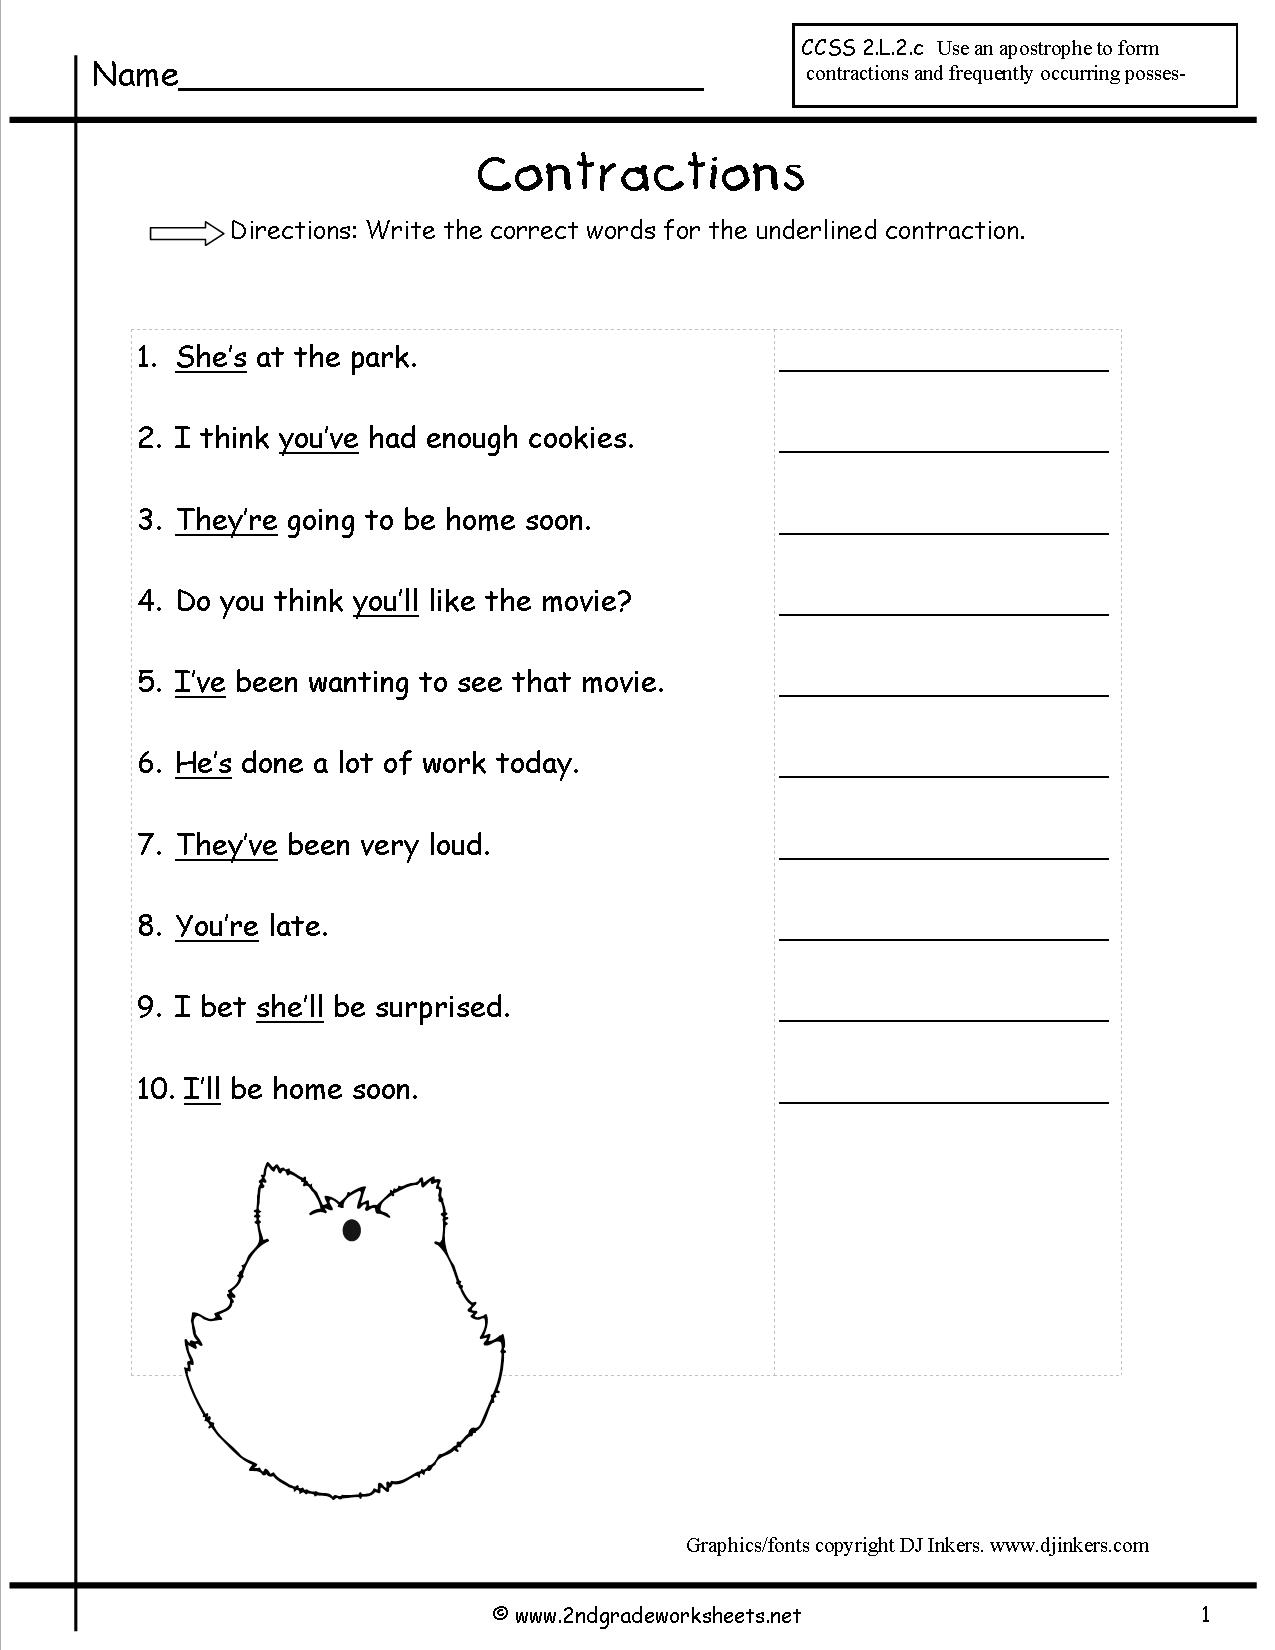 Contractions Worksheet For 1st Grade